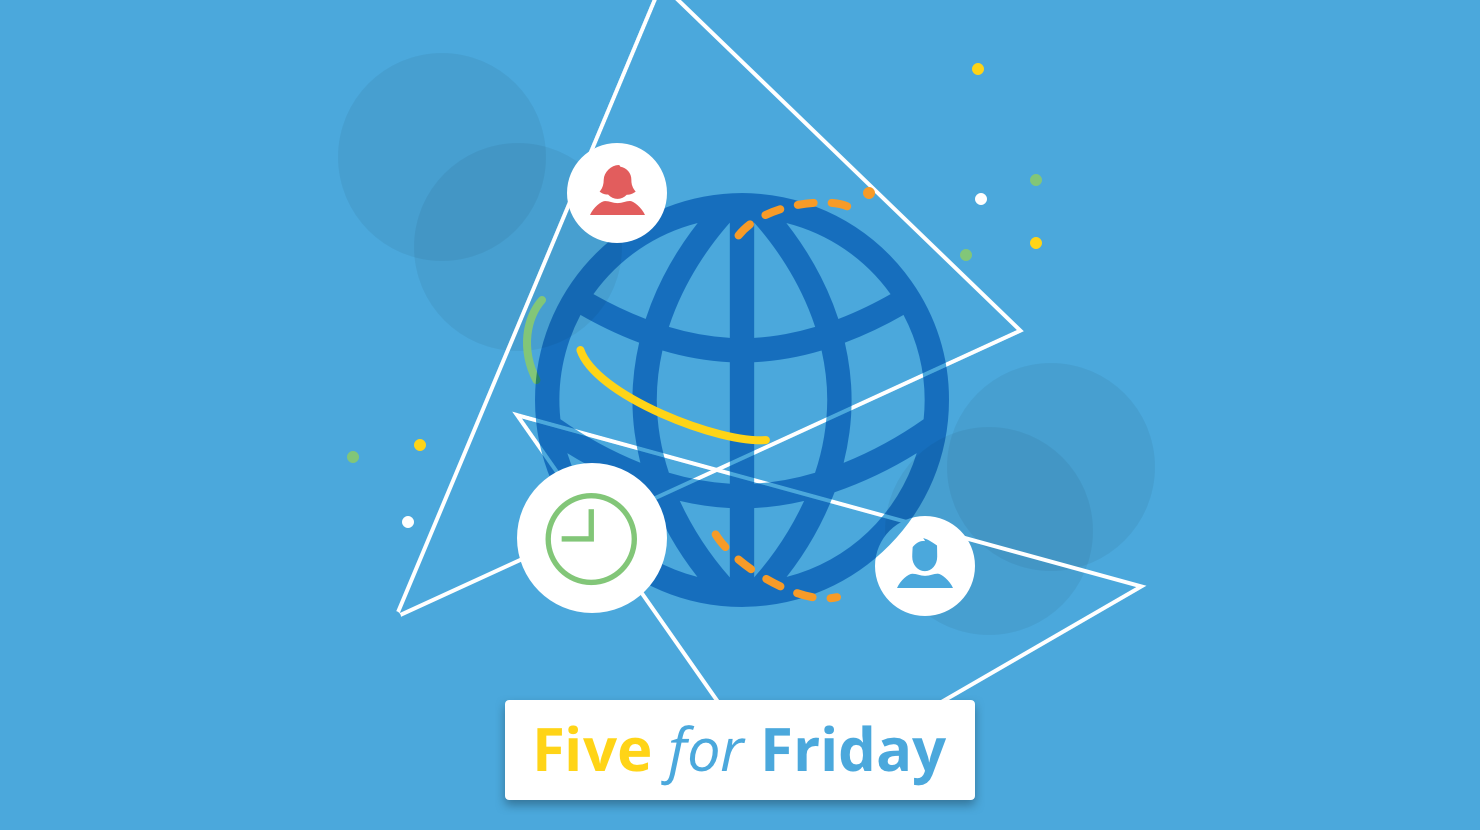 Five for Friday: Flexible work